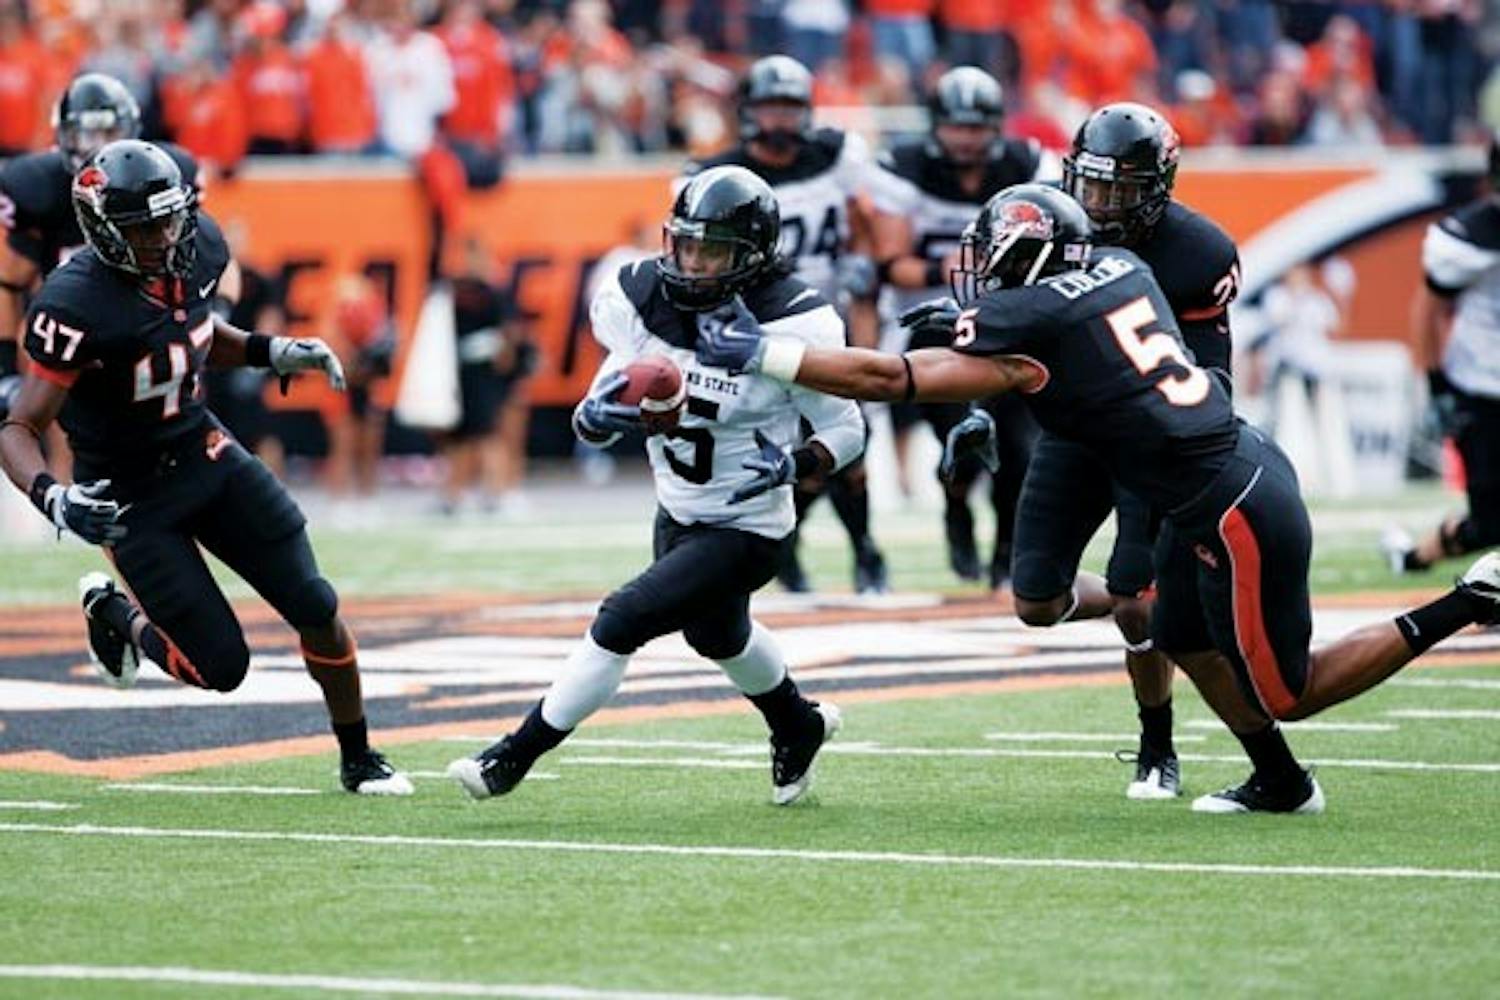 CATCH AND RUN: Portland State senior wide receiver Ray Fry (center) outruns defenders in a game against Oregon State last season. Fry led the Vikings in receiving last season. (Photo courtes of PSU Media Relations)